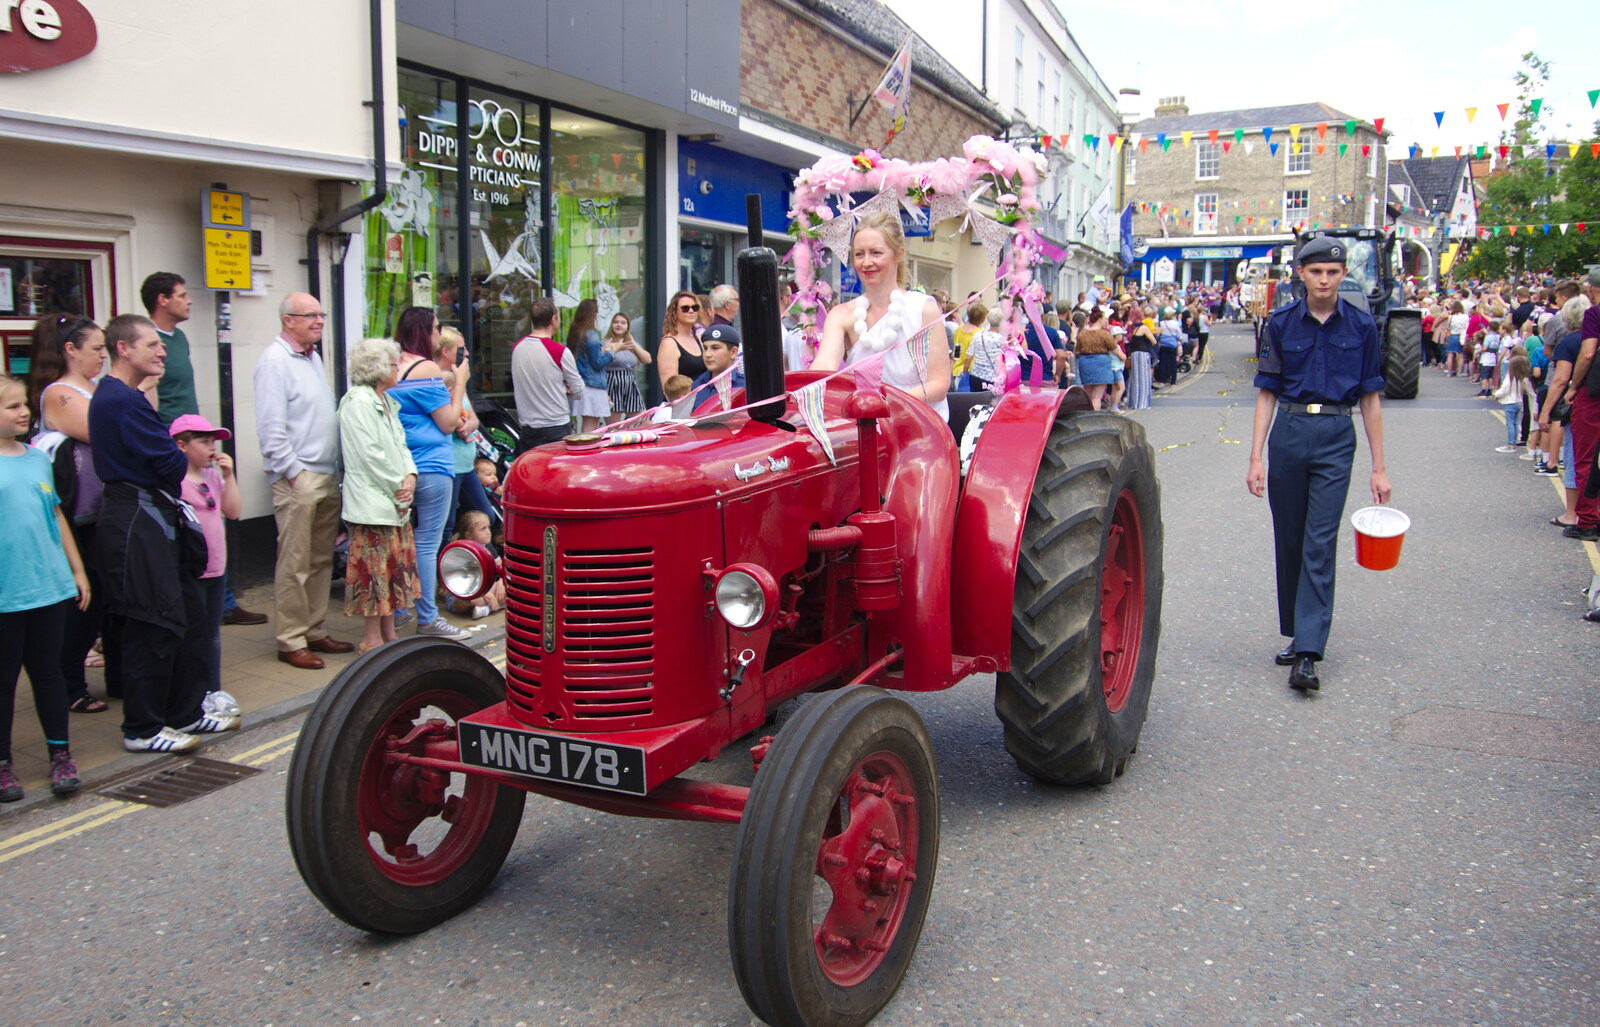 Another David Brown tractor from The Diss Carnival 2019, Diss, Norfolk - 9th June 2019